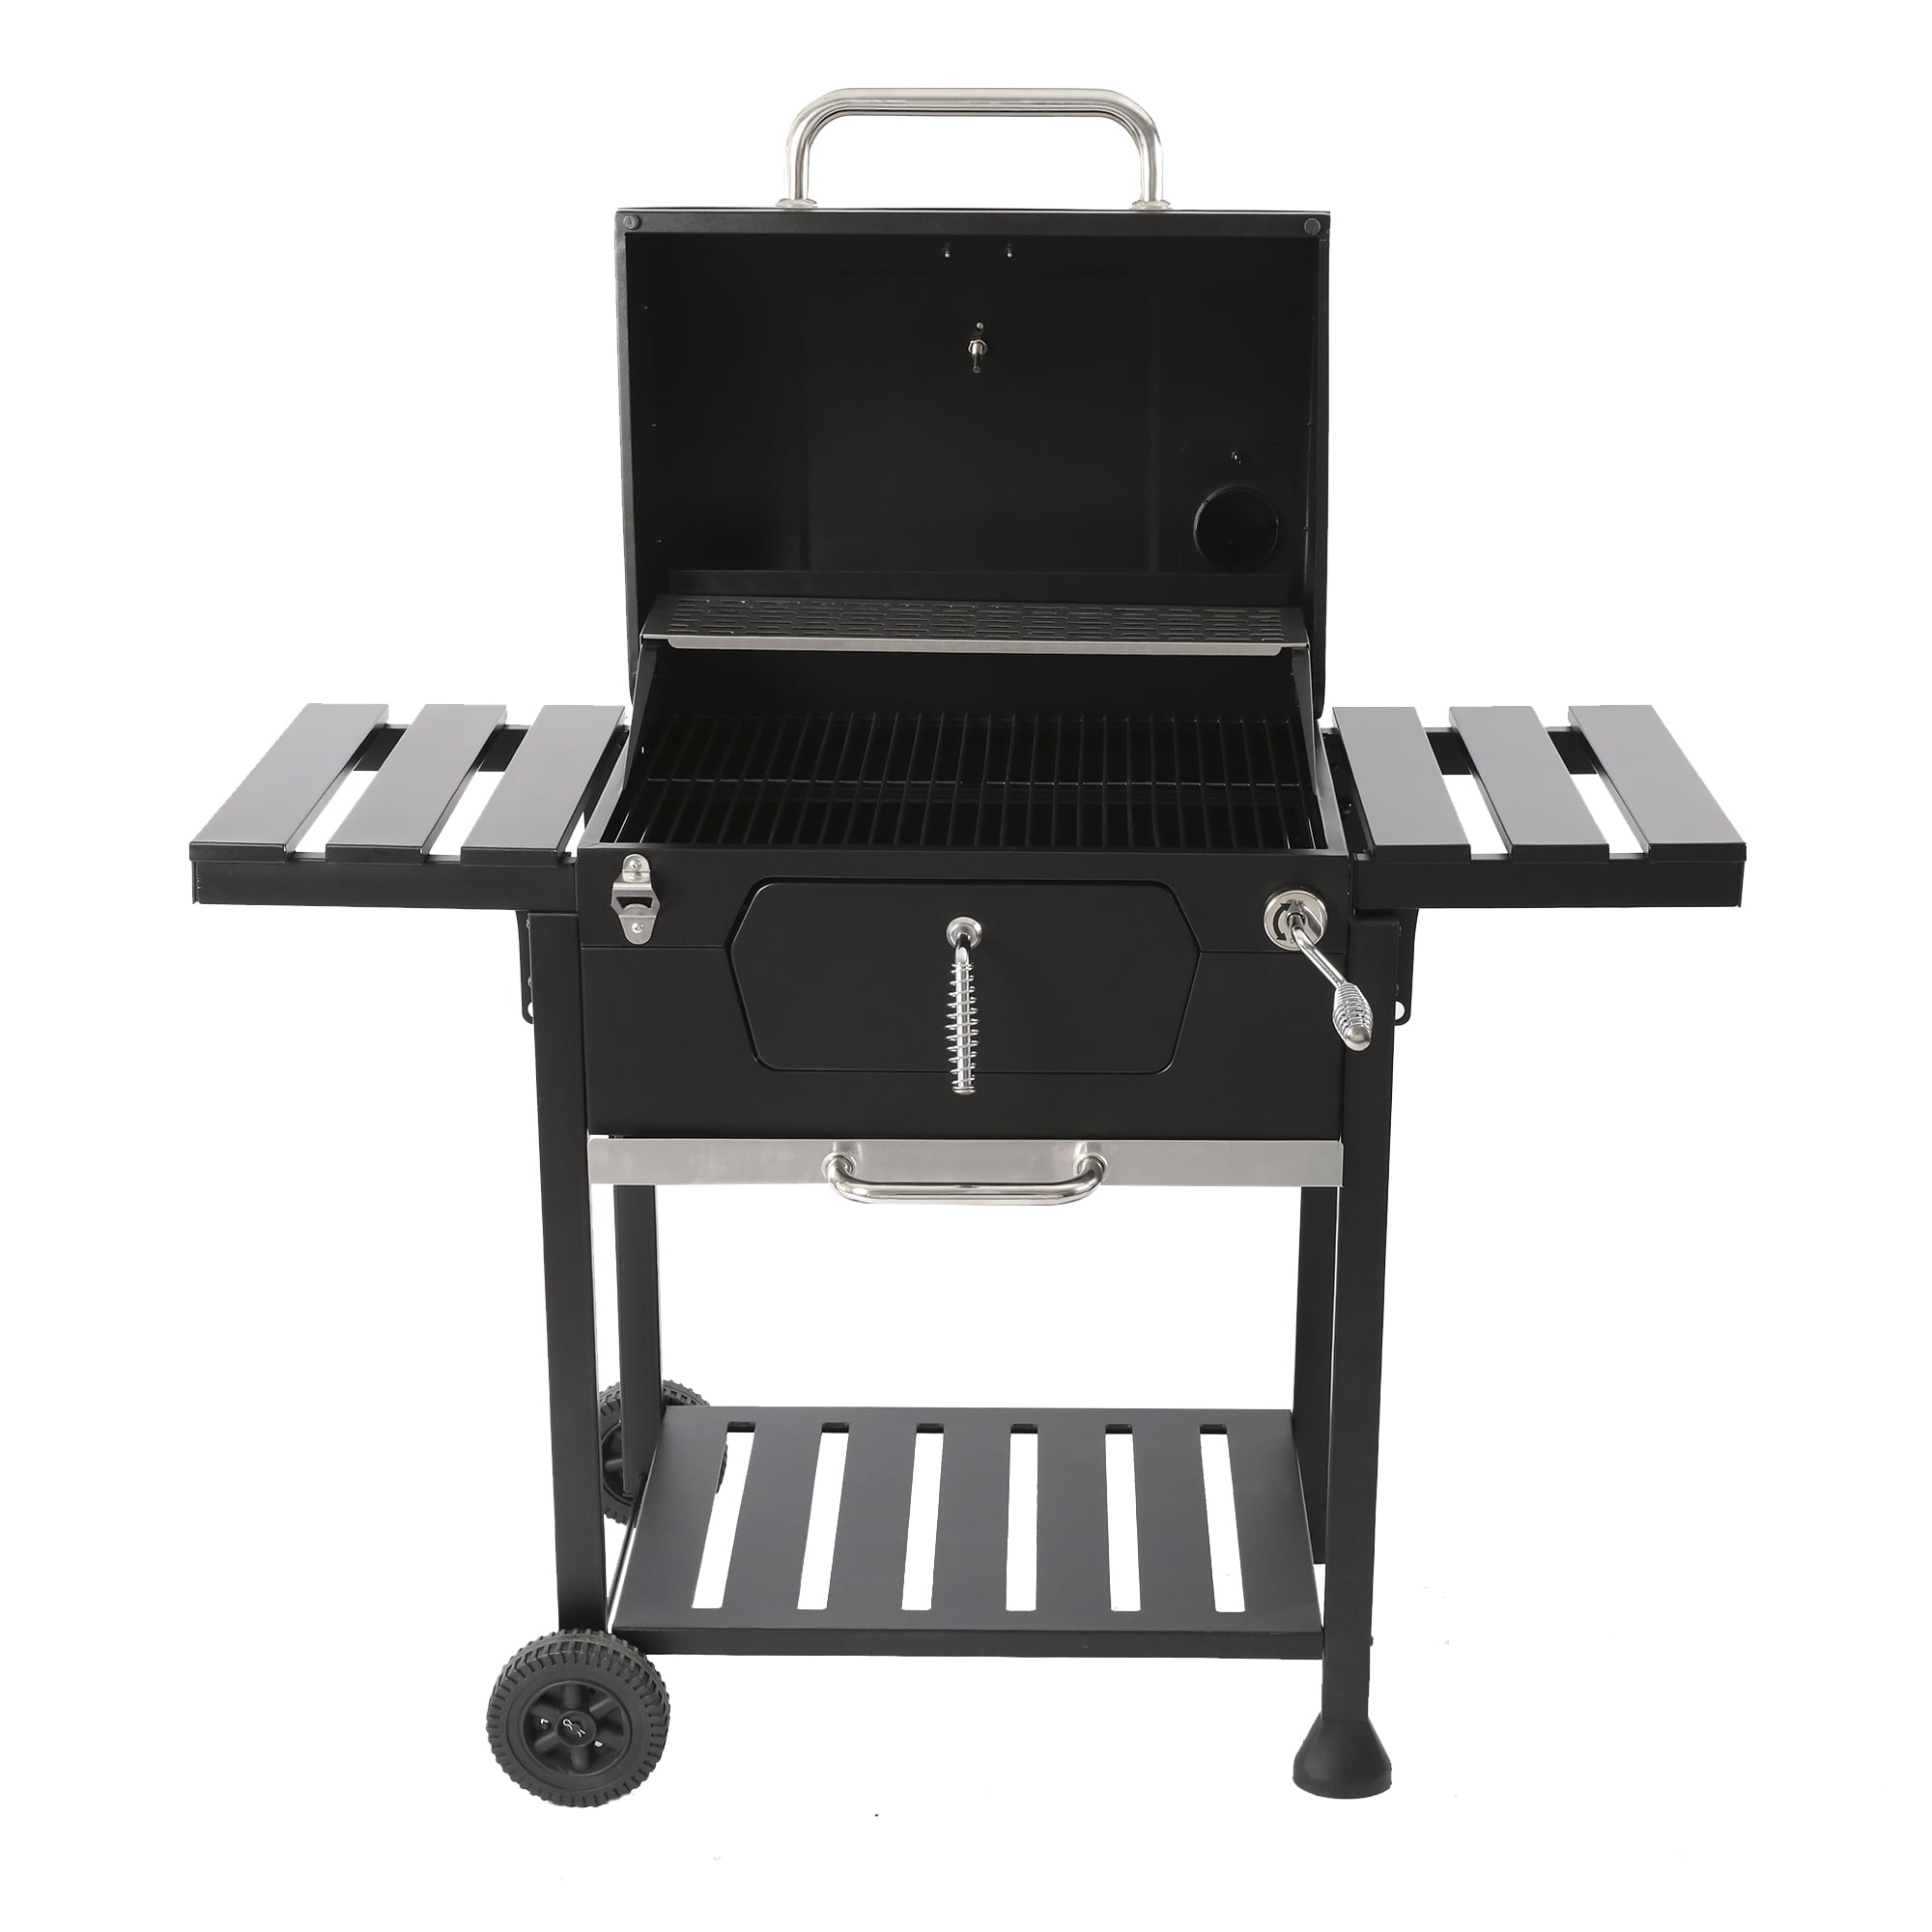 Royal Gourmet 24 CD1824EC, Charcoal BBQ Grill with Cover 